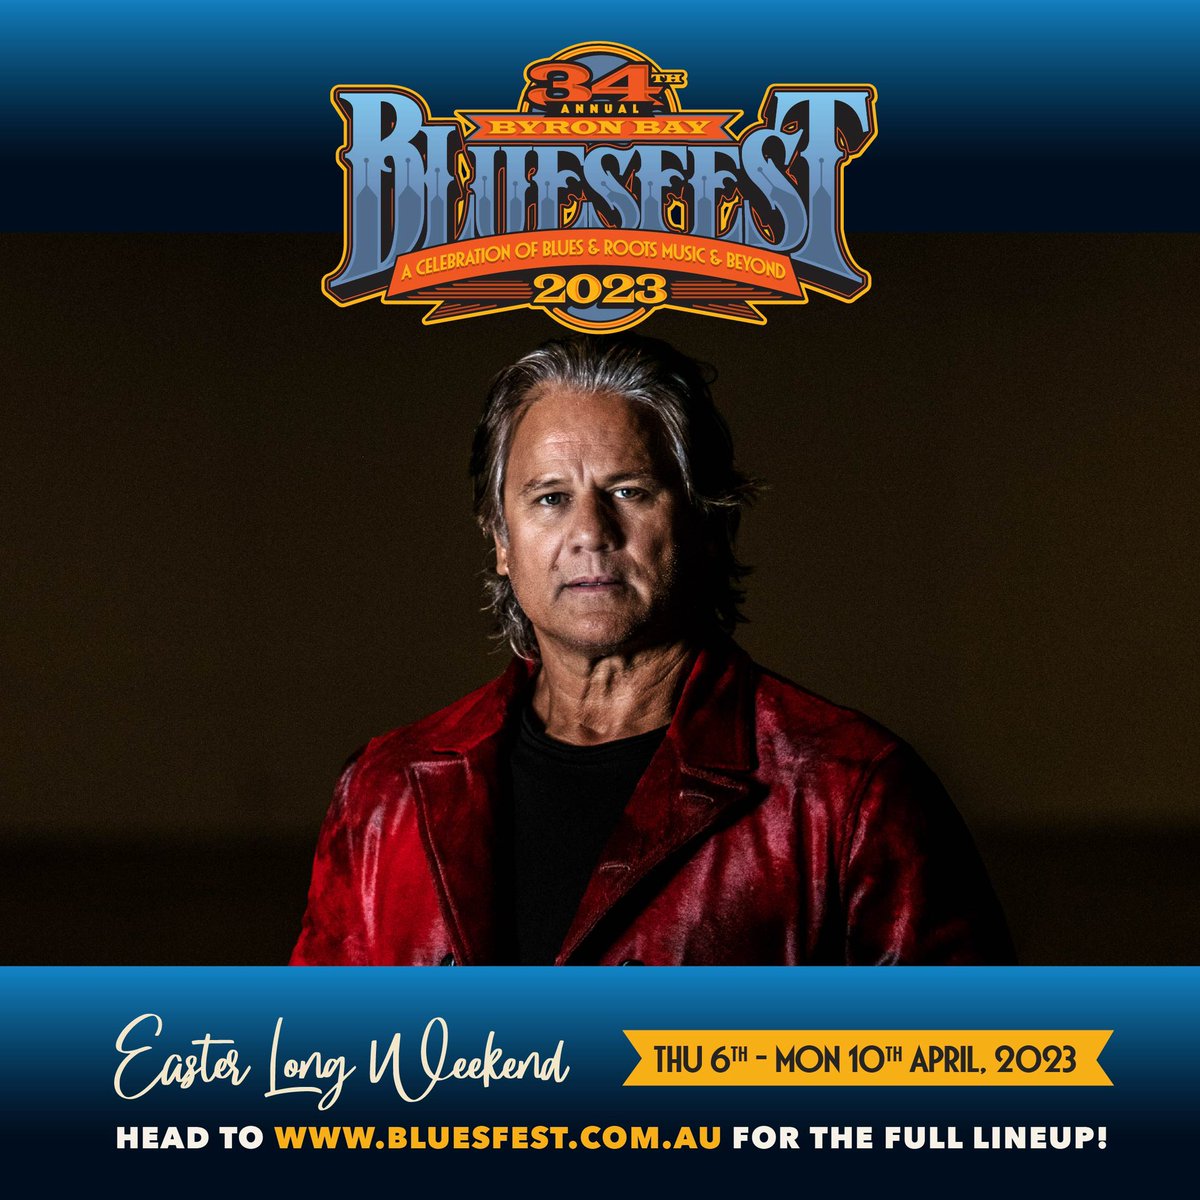 Excited to be heading to Bluesfest 2023! See you there. Dates and Times: 2:00 pm, Thu 6 April - Midnight, Mon 10 April Byron Events Farm, NSW Ticket link:  All tickets links will be available via the #Bluesfest website here: bluesfest.com.au/tickets/